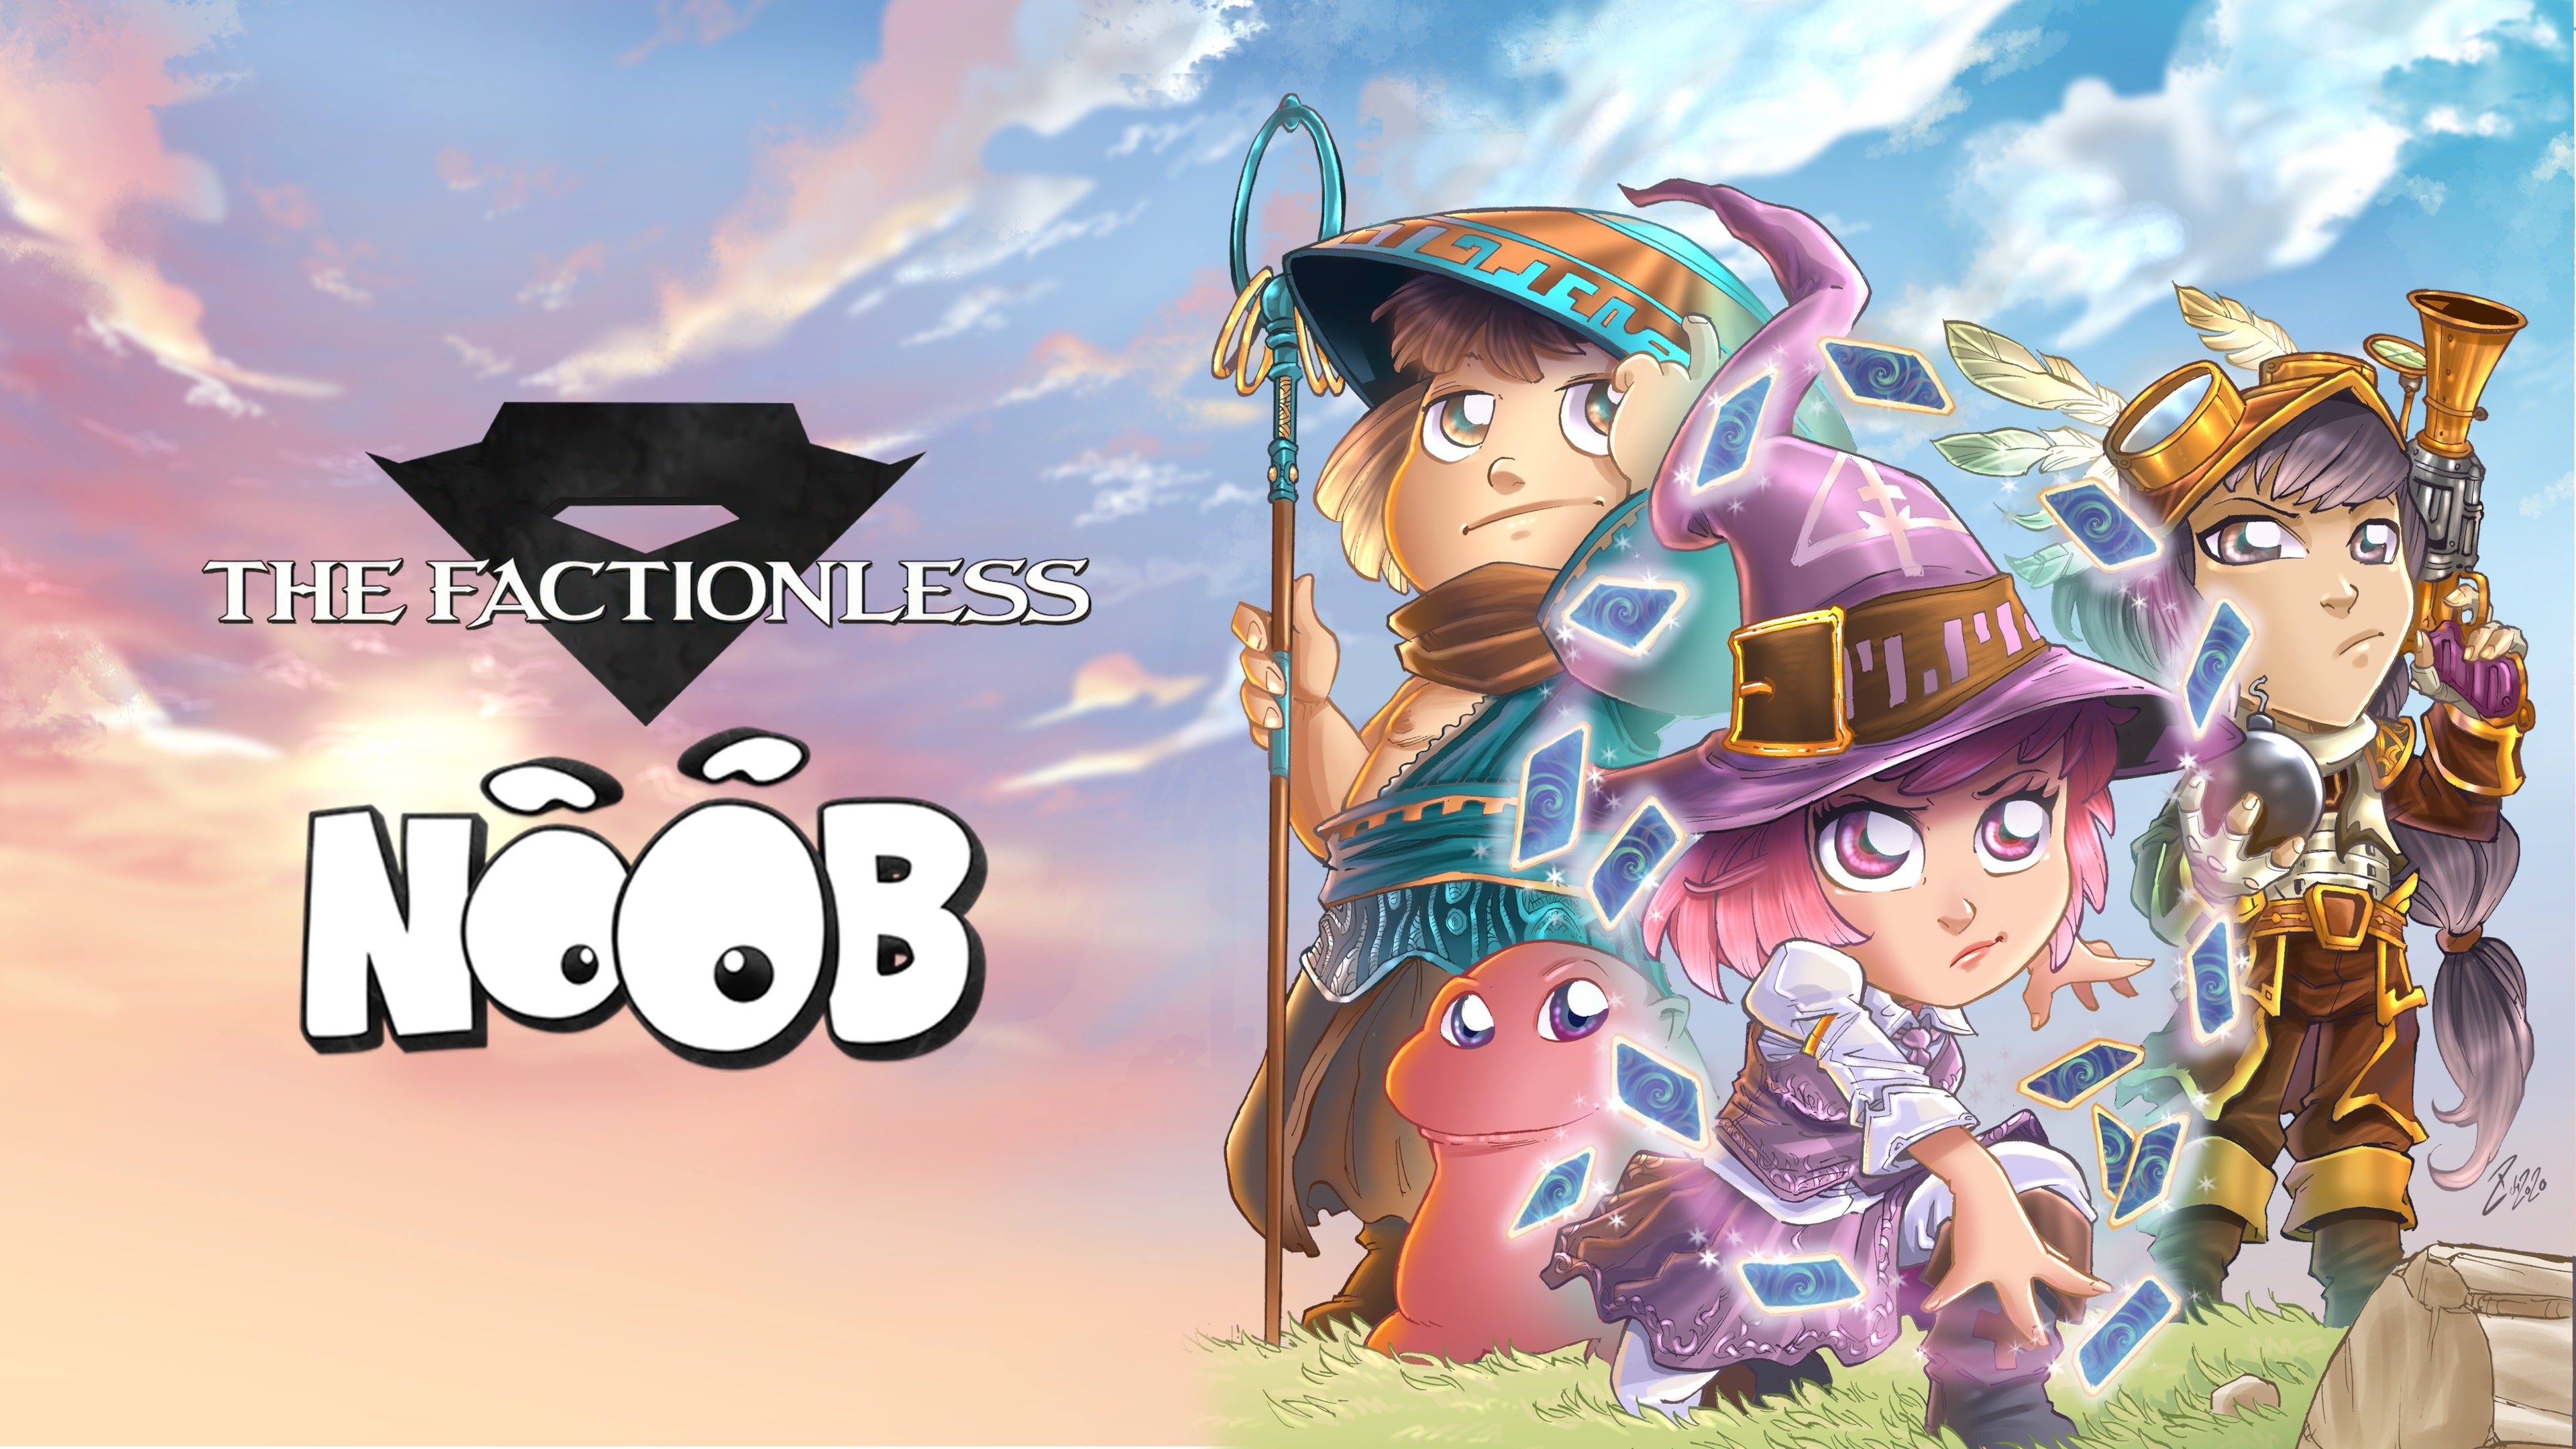 download the new version NOOB - The Factionless